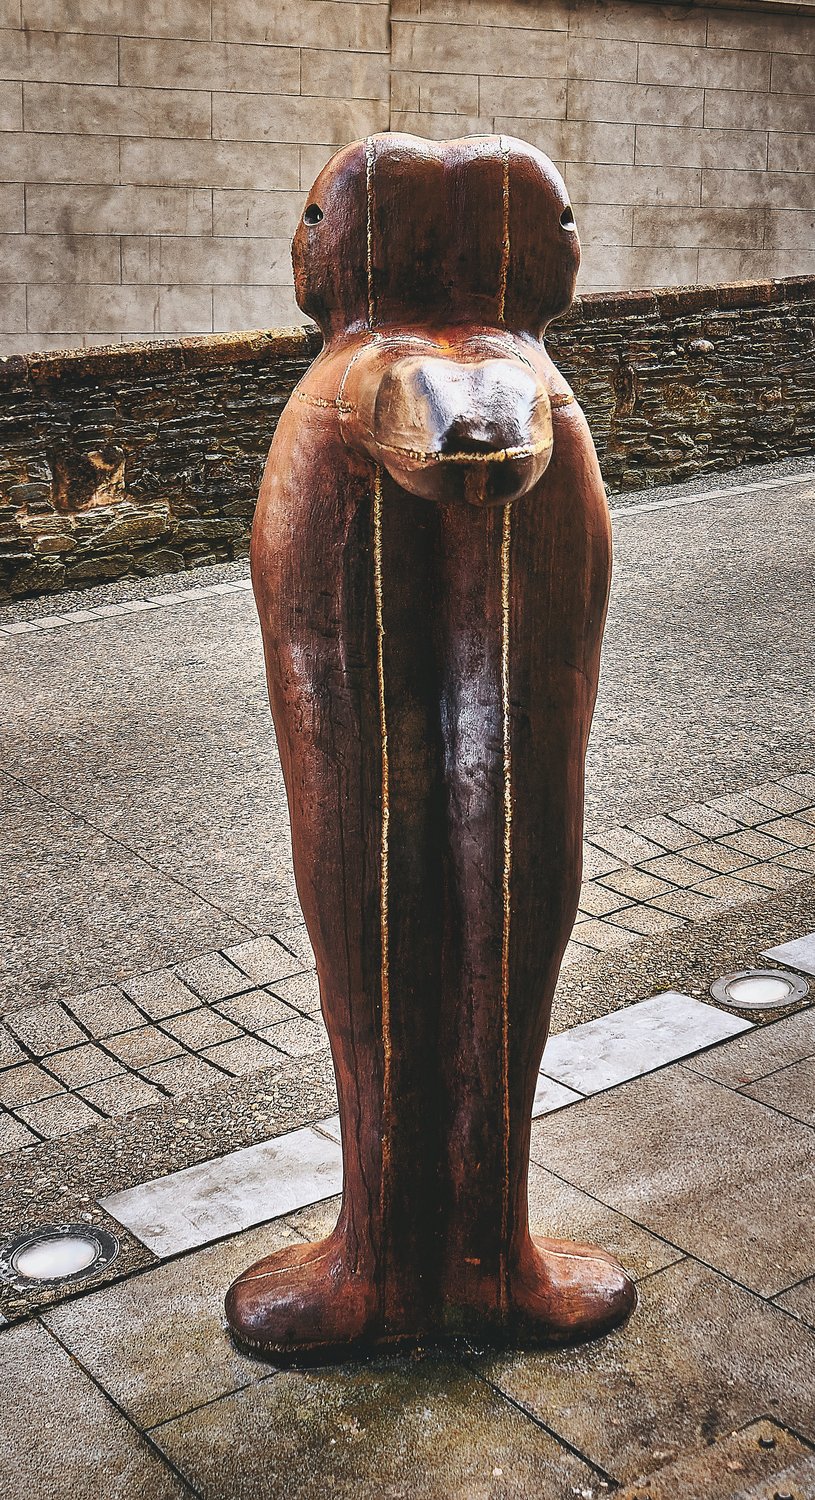 A sculpture for The Derry City Walls by Antony Gormley.